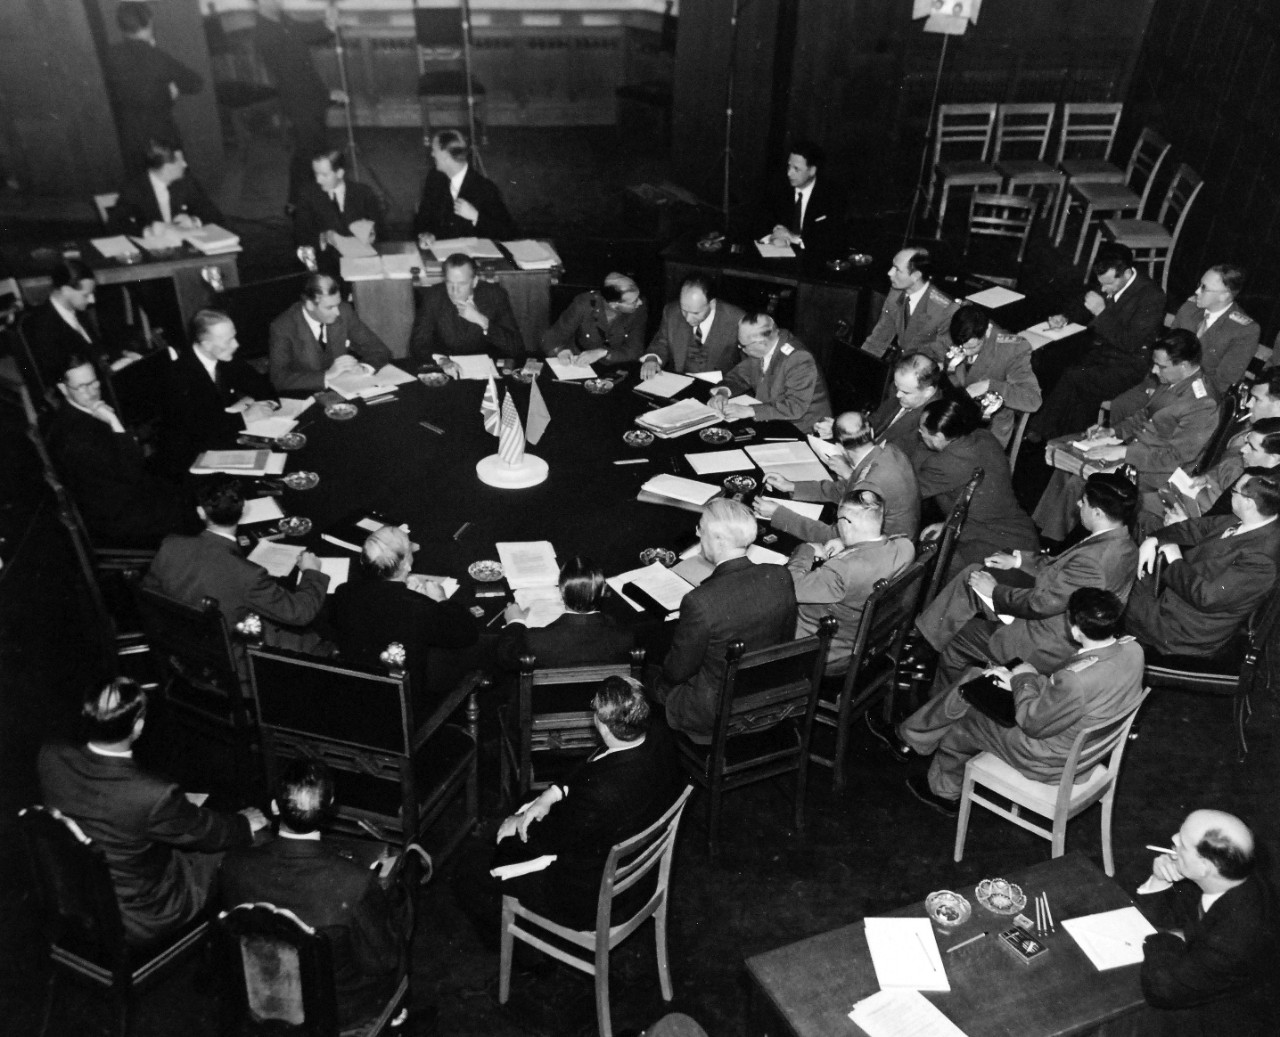 80-G-700116: Potsdam Conference, July-August 1945.  The “Little Three” (Foreign Ministers) meeting in the same conference room as the Heads of States at Potsdam, Germany.  Foreign Minister Anthony Eden at upper left, Secretary of State James F. Byrnes, and lower left, Foreign Commissar V. Molotov, extreme right.  Photographed released July 24, 1945.  Official U.S. Navy Photograph, now in the collections of the National Archives.  (2016/02/23).